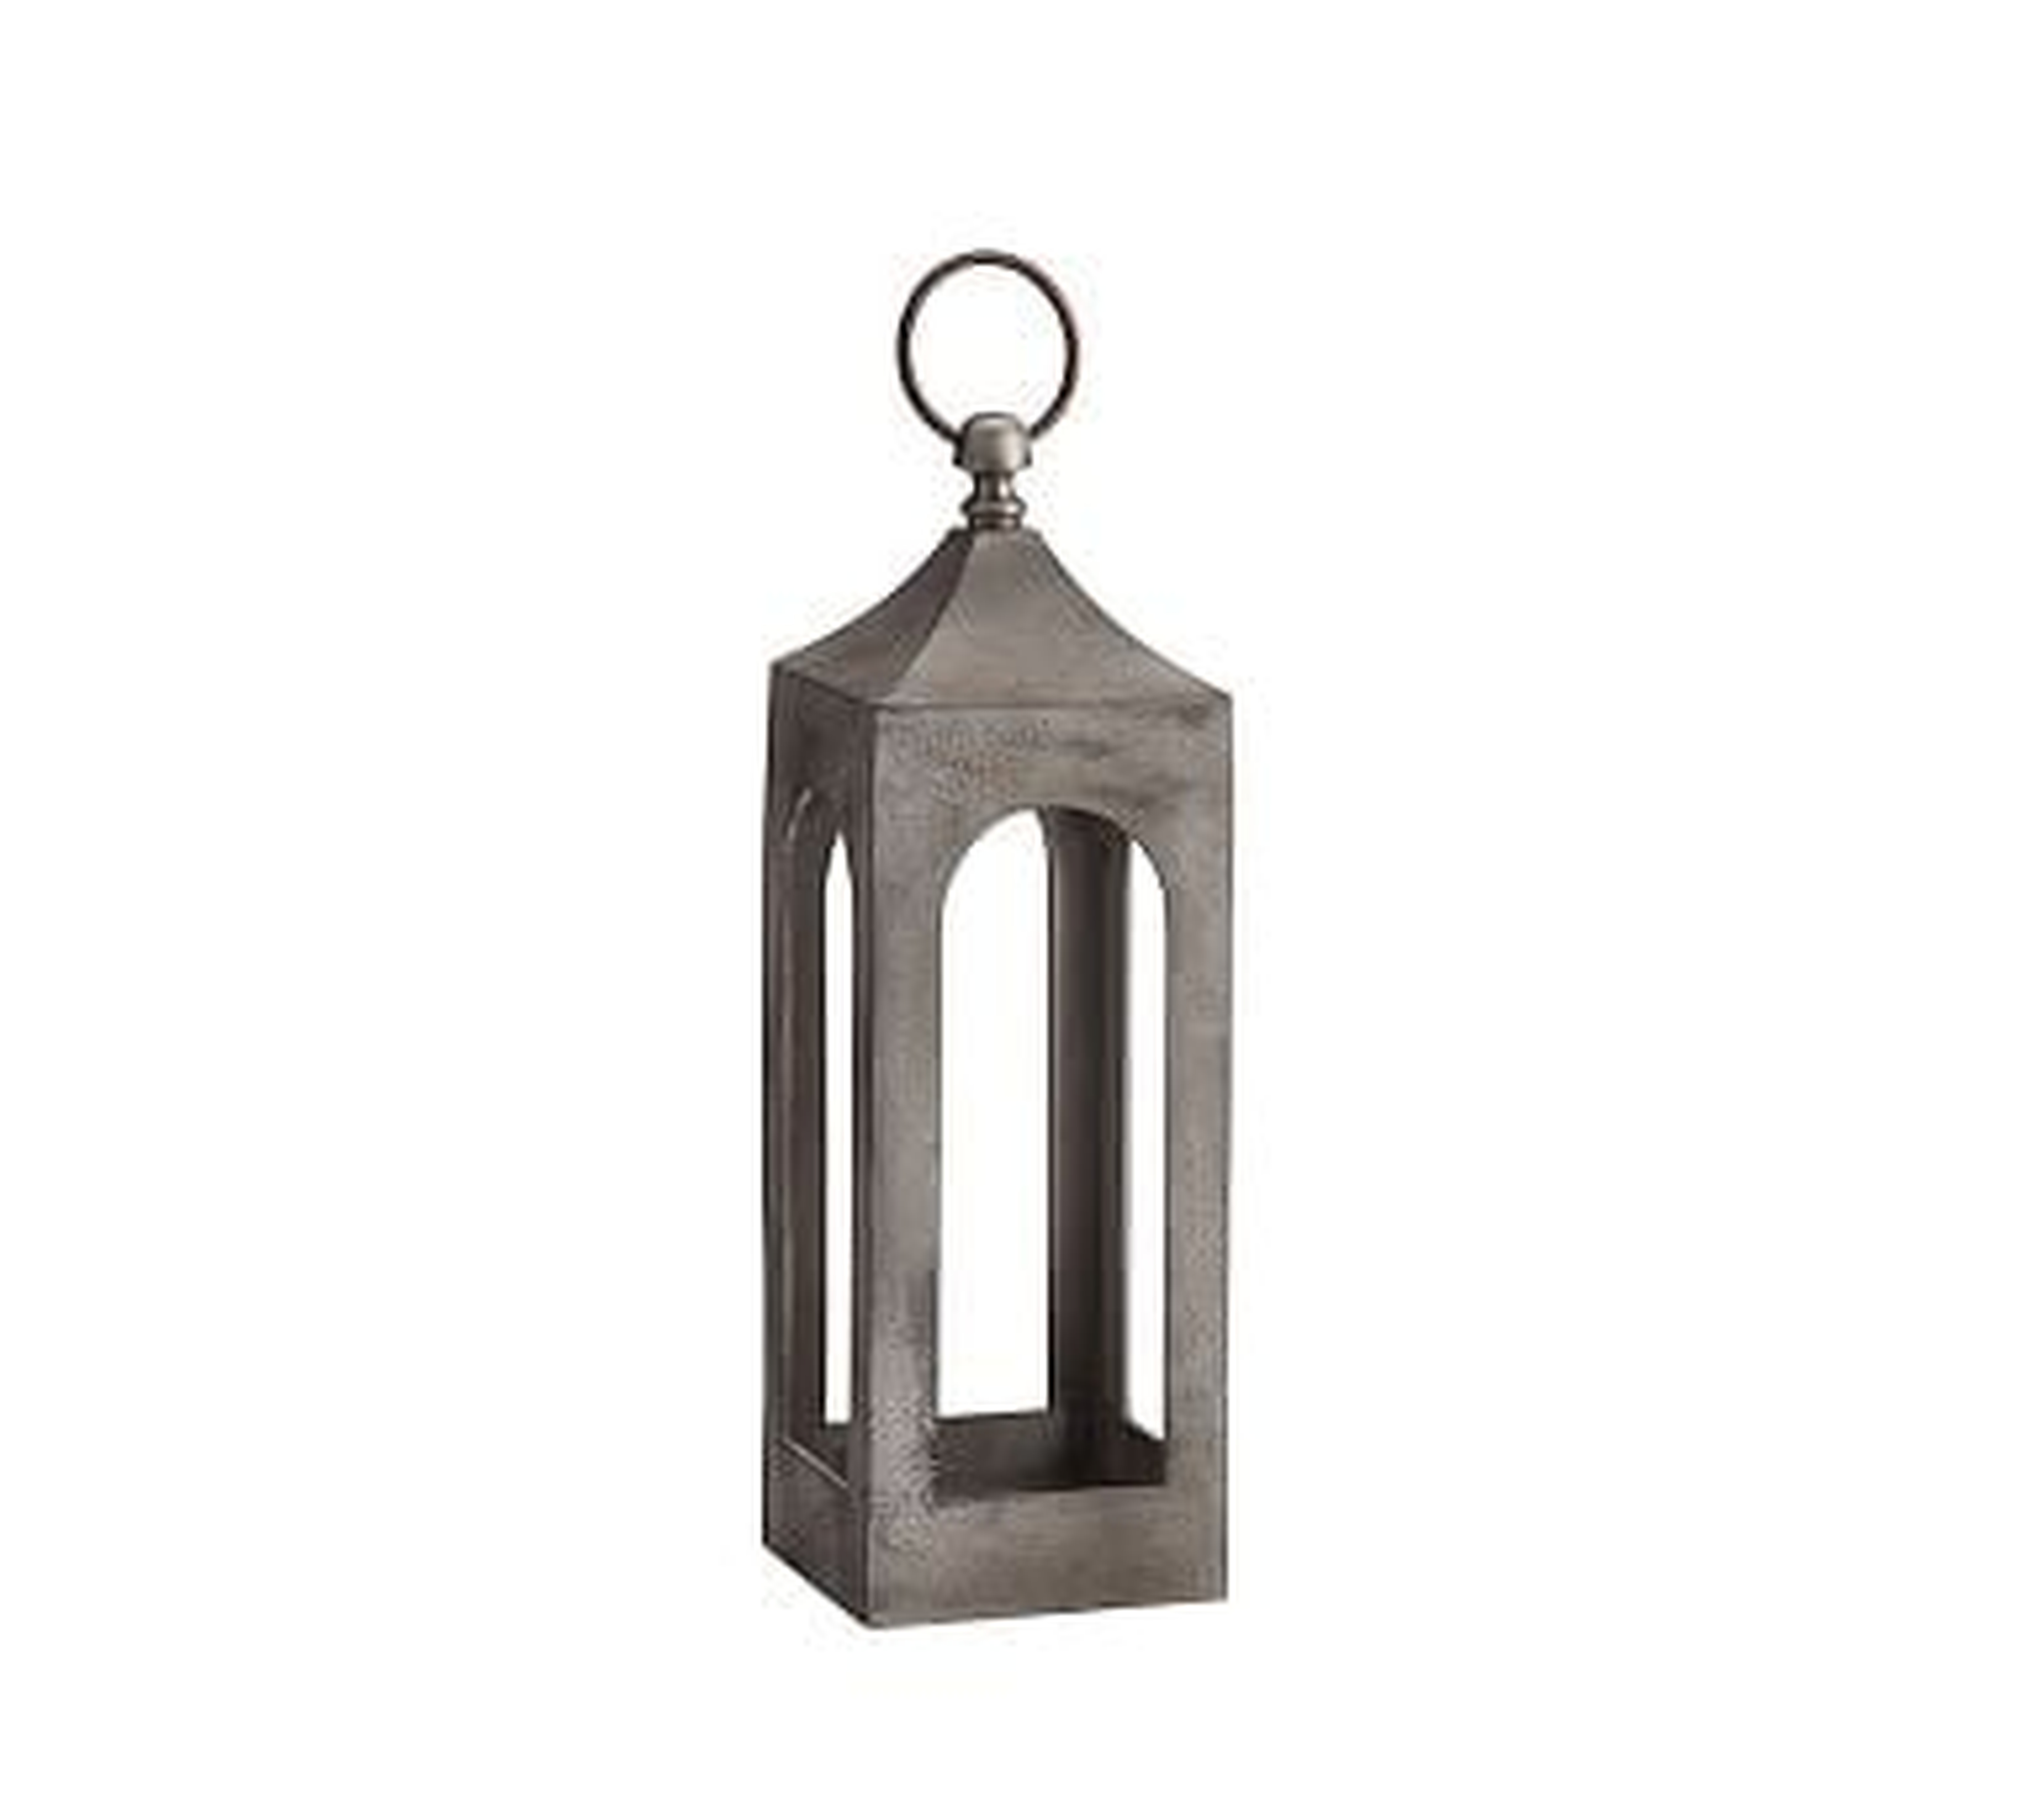 Caleb Handcrafted Metal Indoor/Outdoor Lantern, White Weathered, Small - Pottery Barn